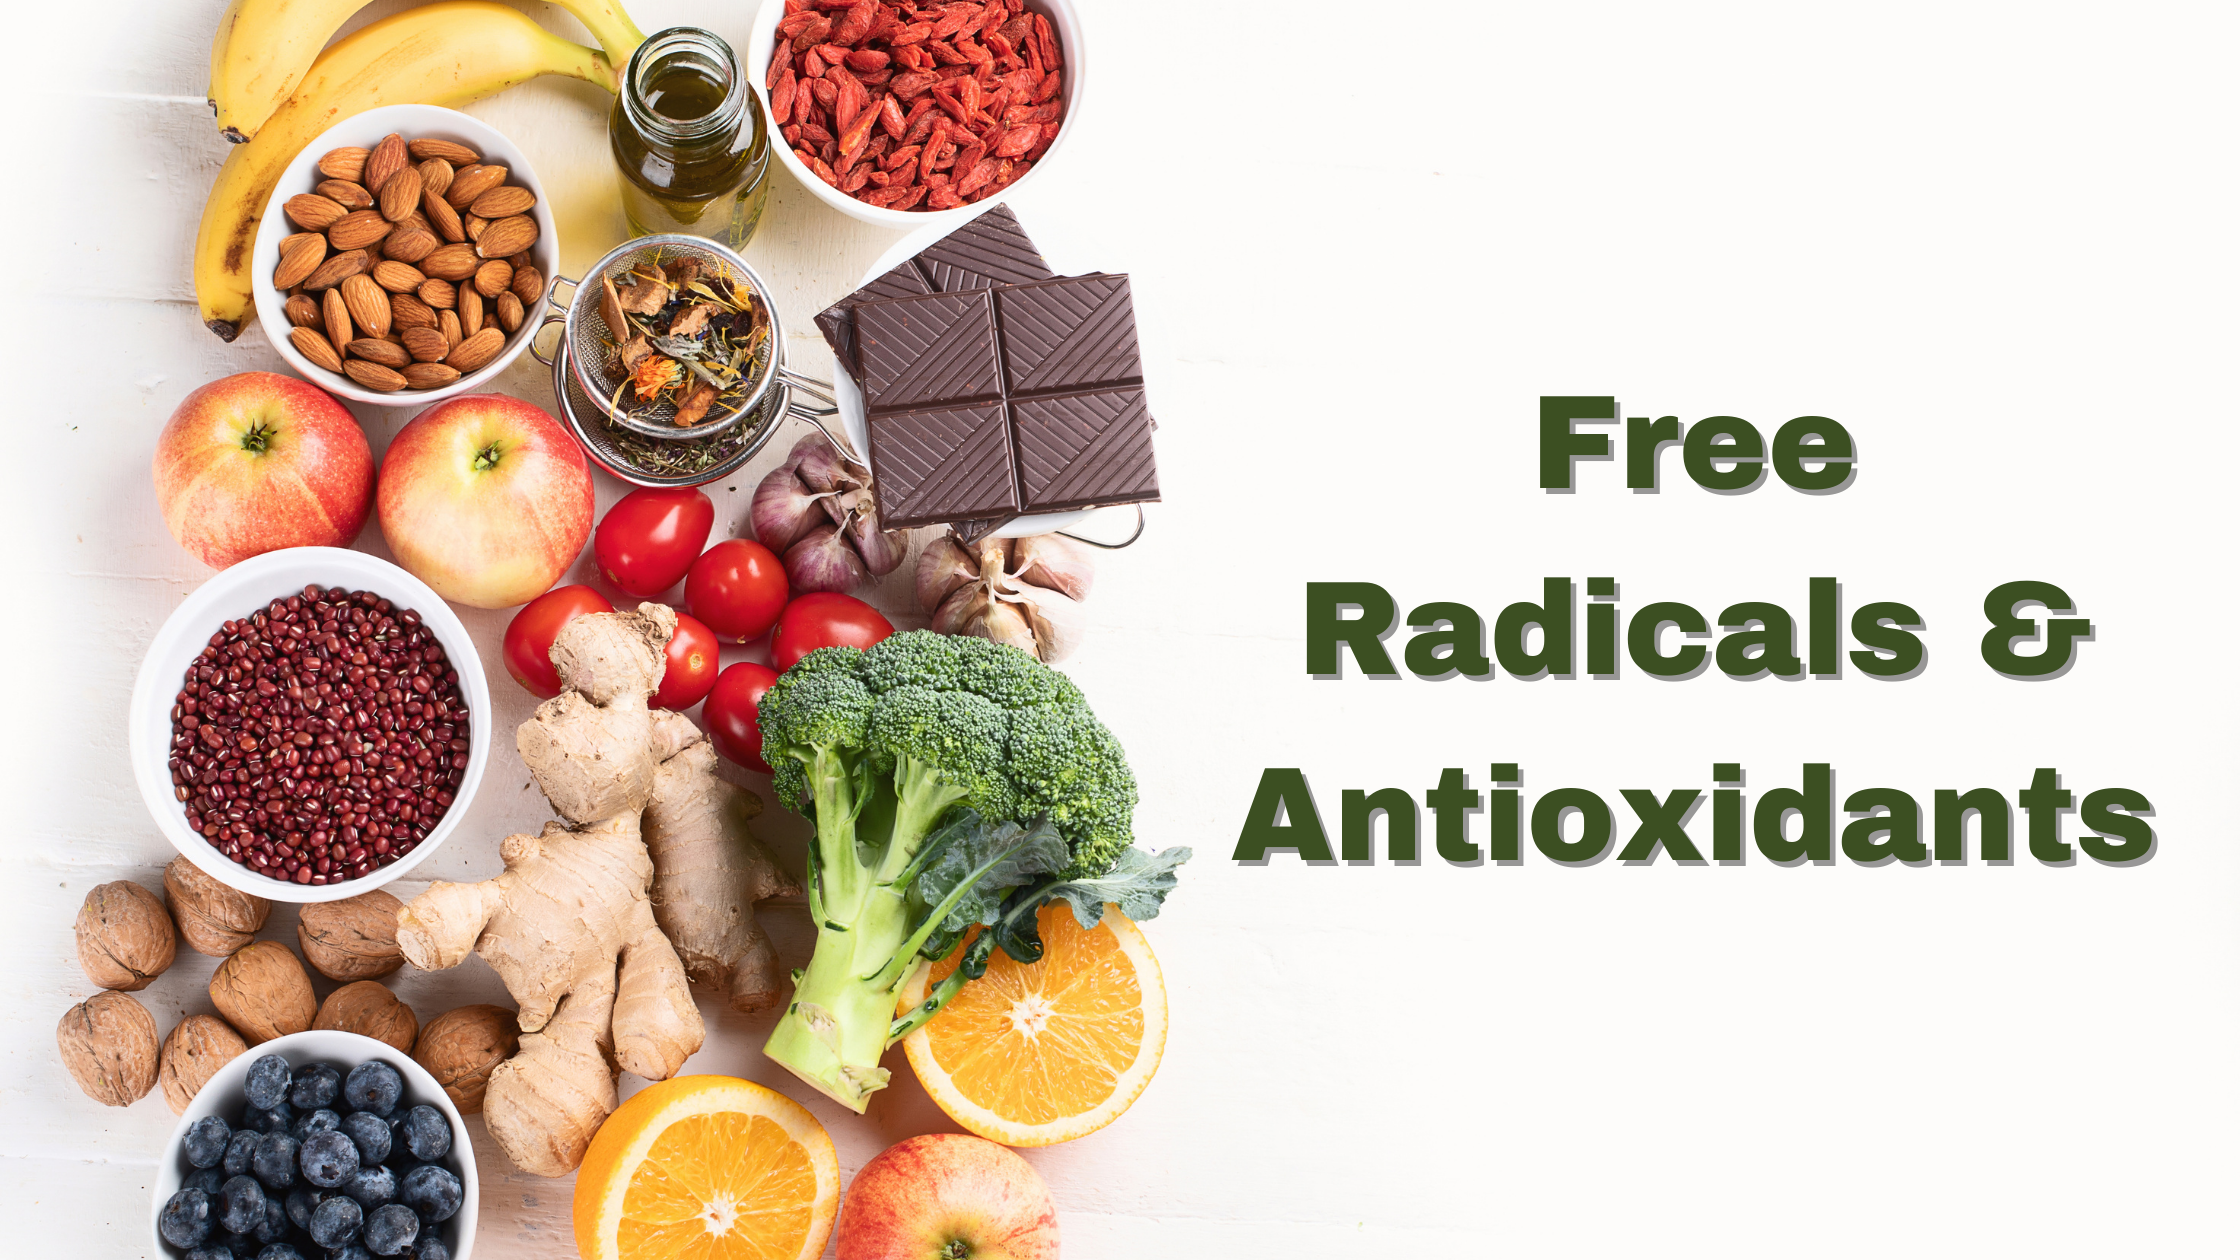 Free Radicals & Antioxidants: Definitions & Misconceptions - MHI